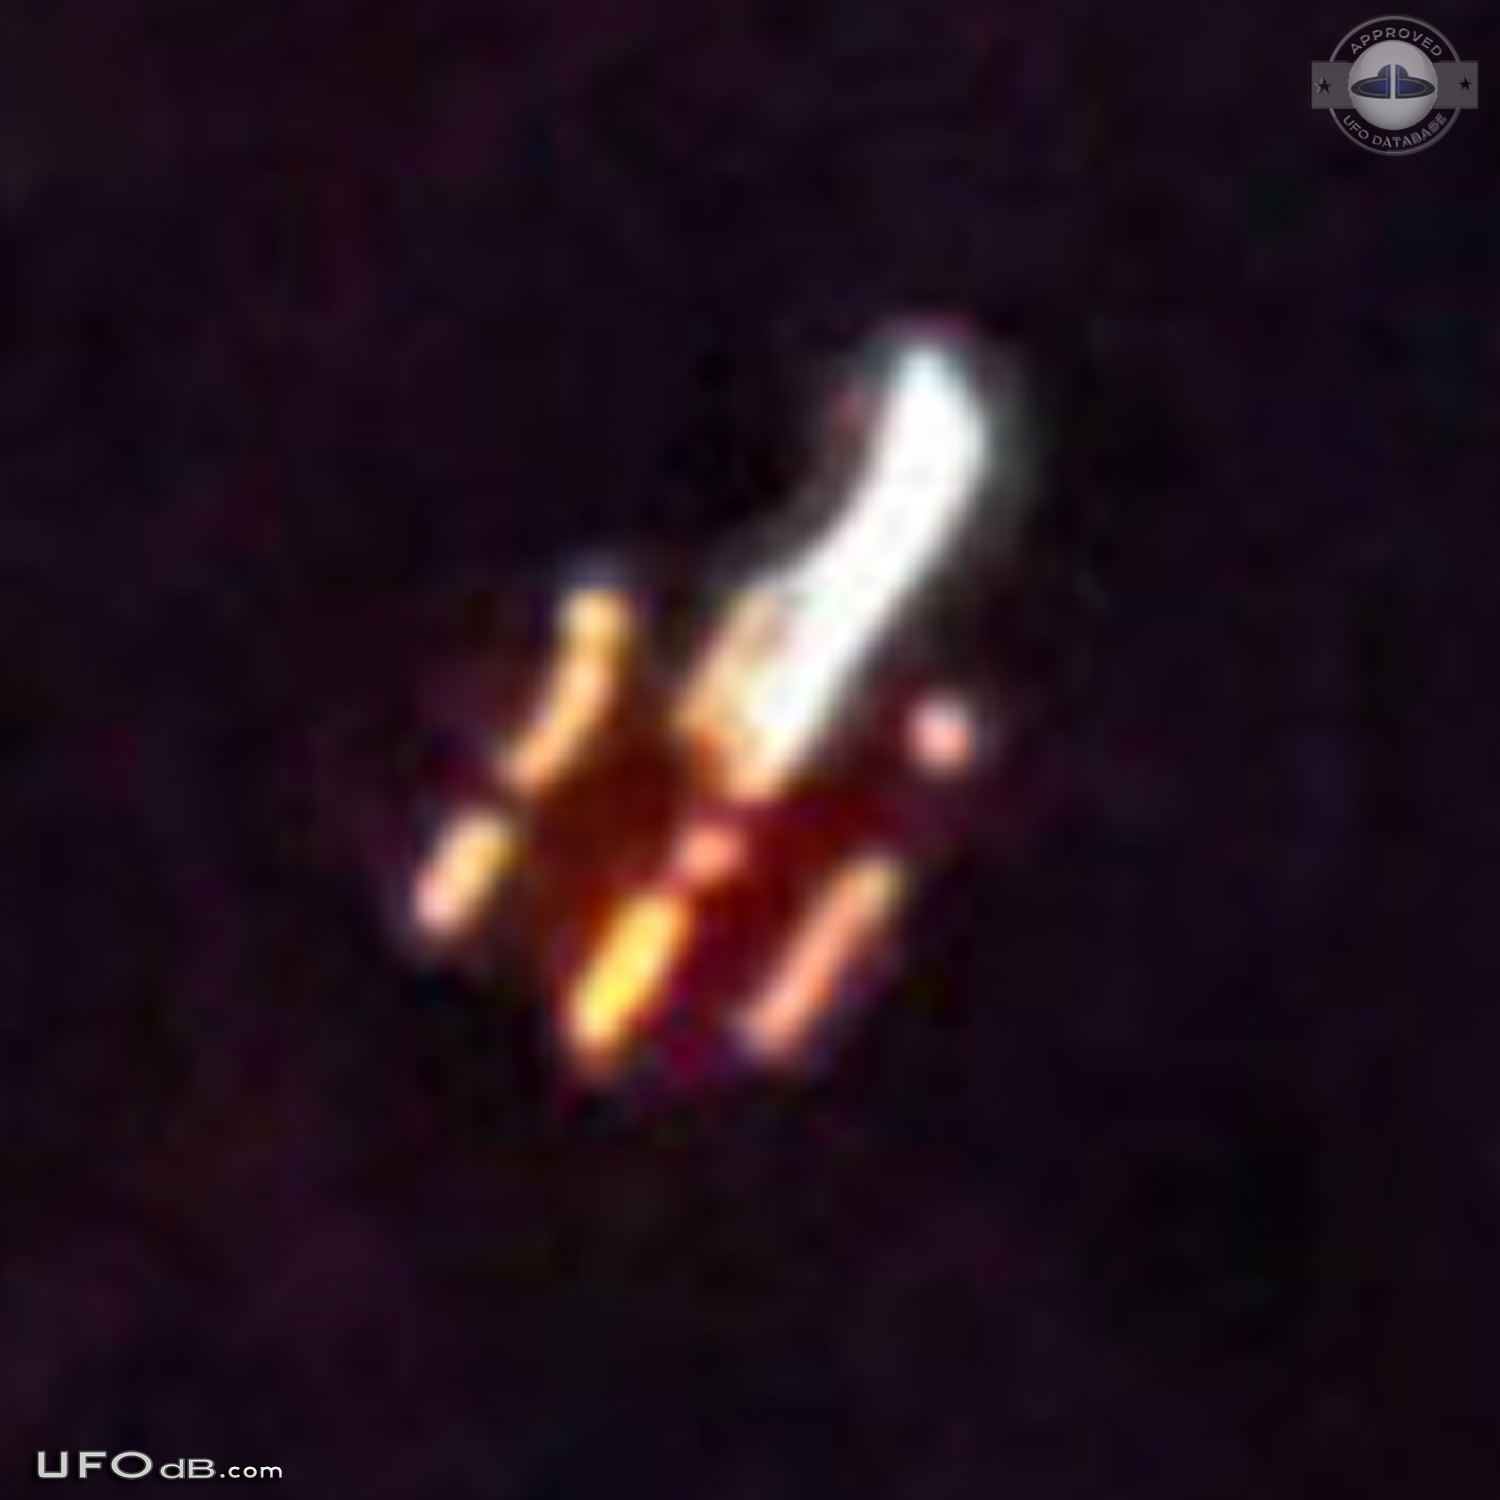 Strange object in the sky of Timmins Ontario Canada on January 22 2015 UFO Picture #581-4